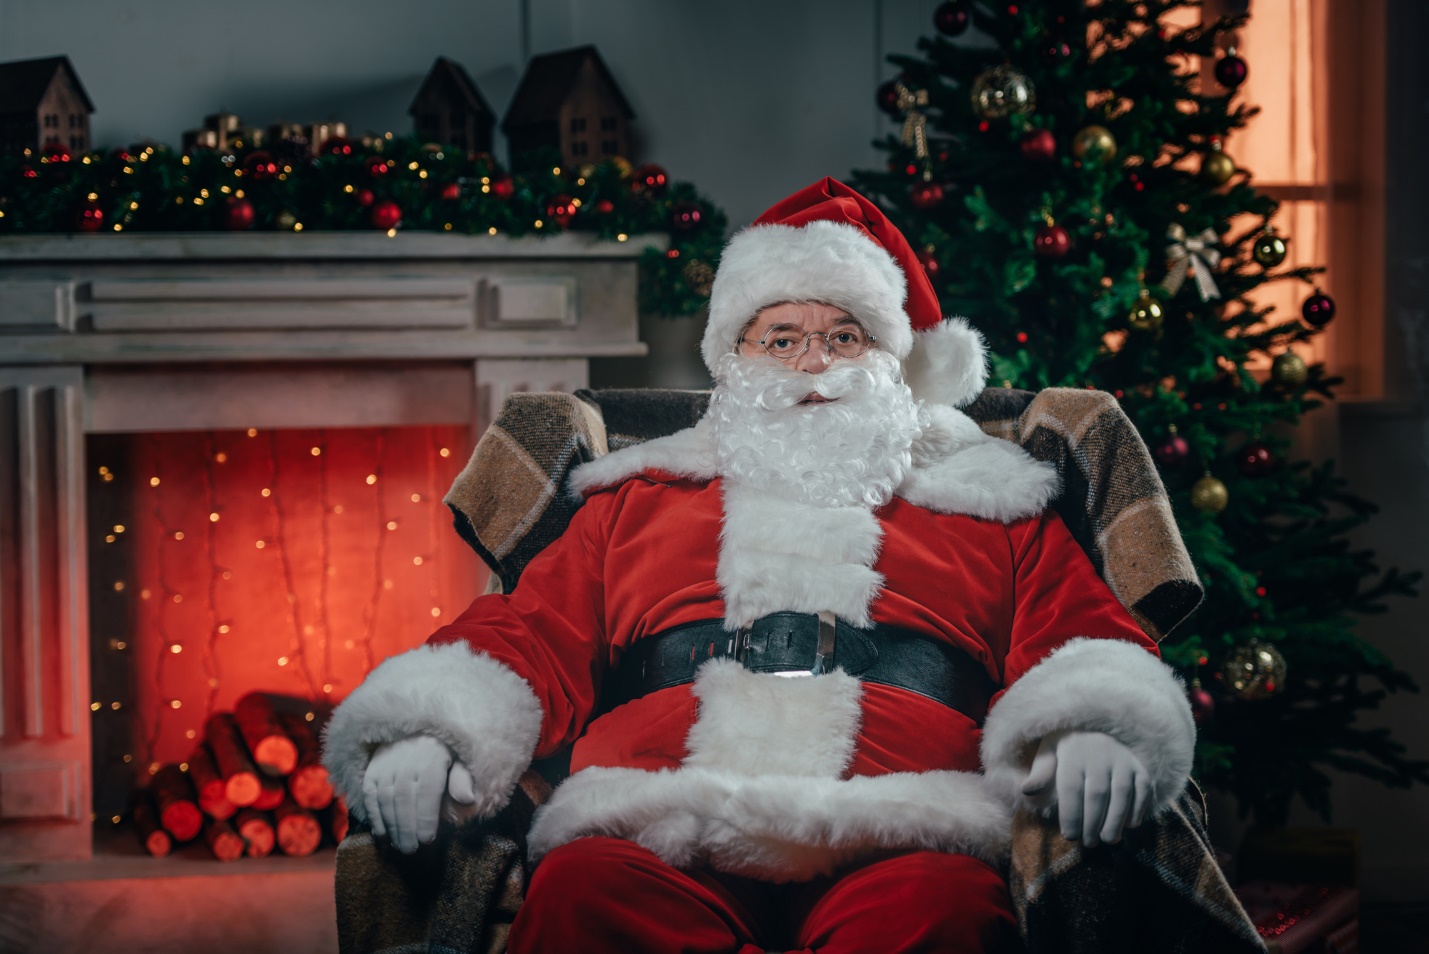 A person in a santa claus garment sitting in a chair

Description automatically generated